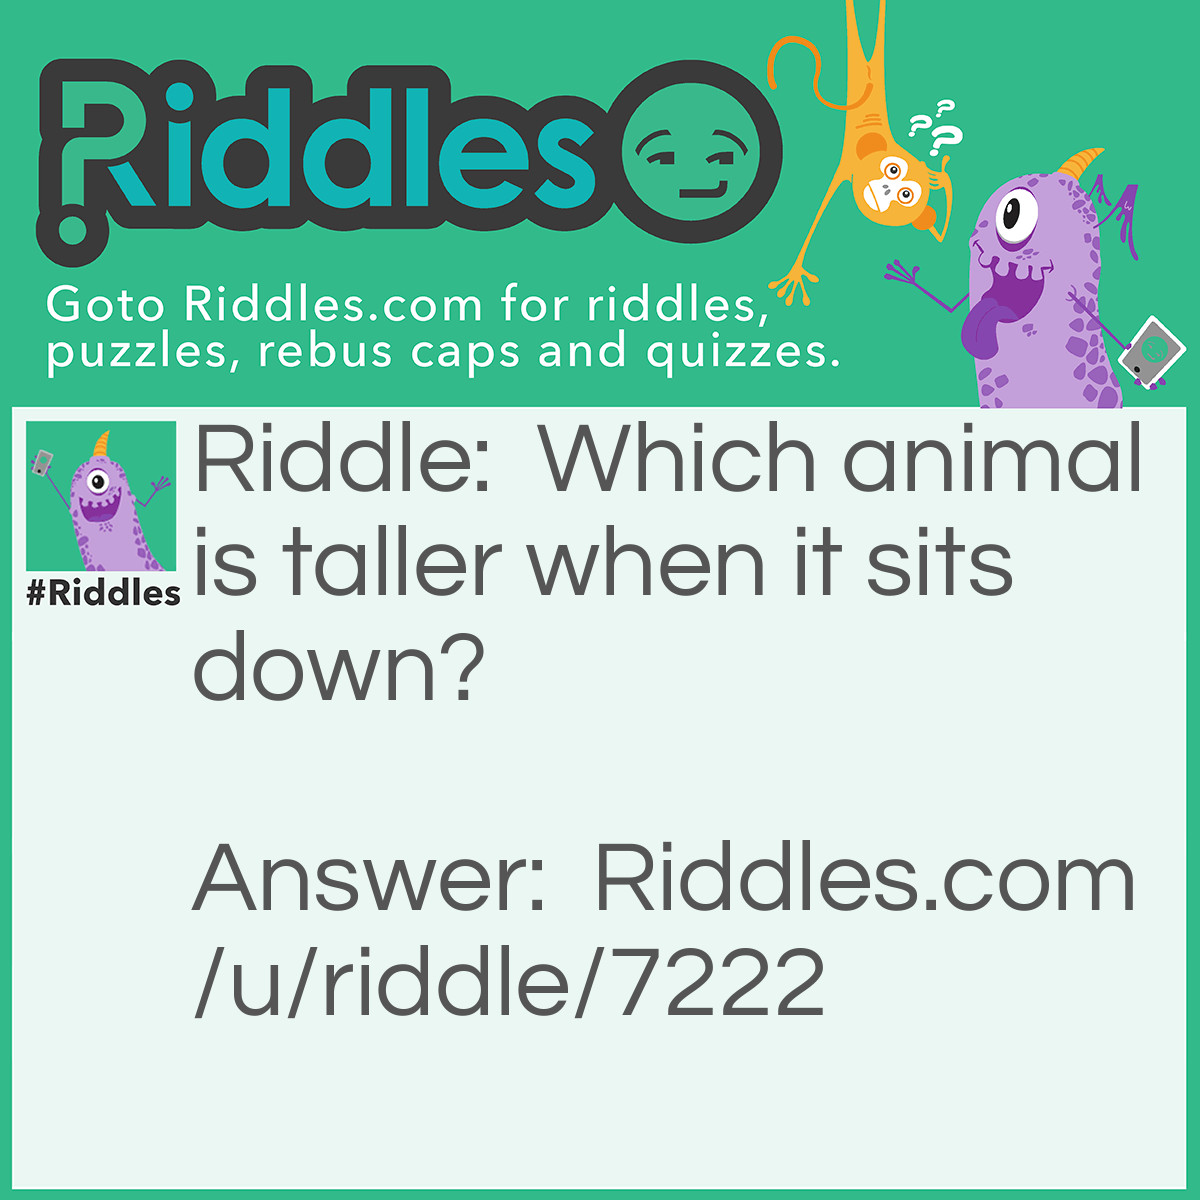 Riddle: Which animal is taller when it sits down? Answer: Dog.